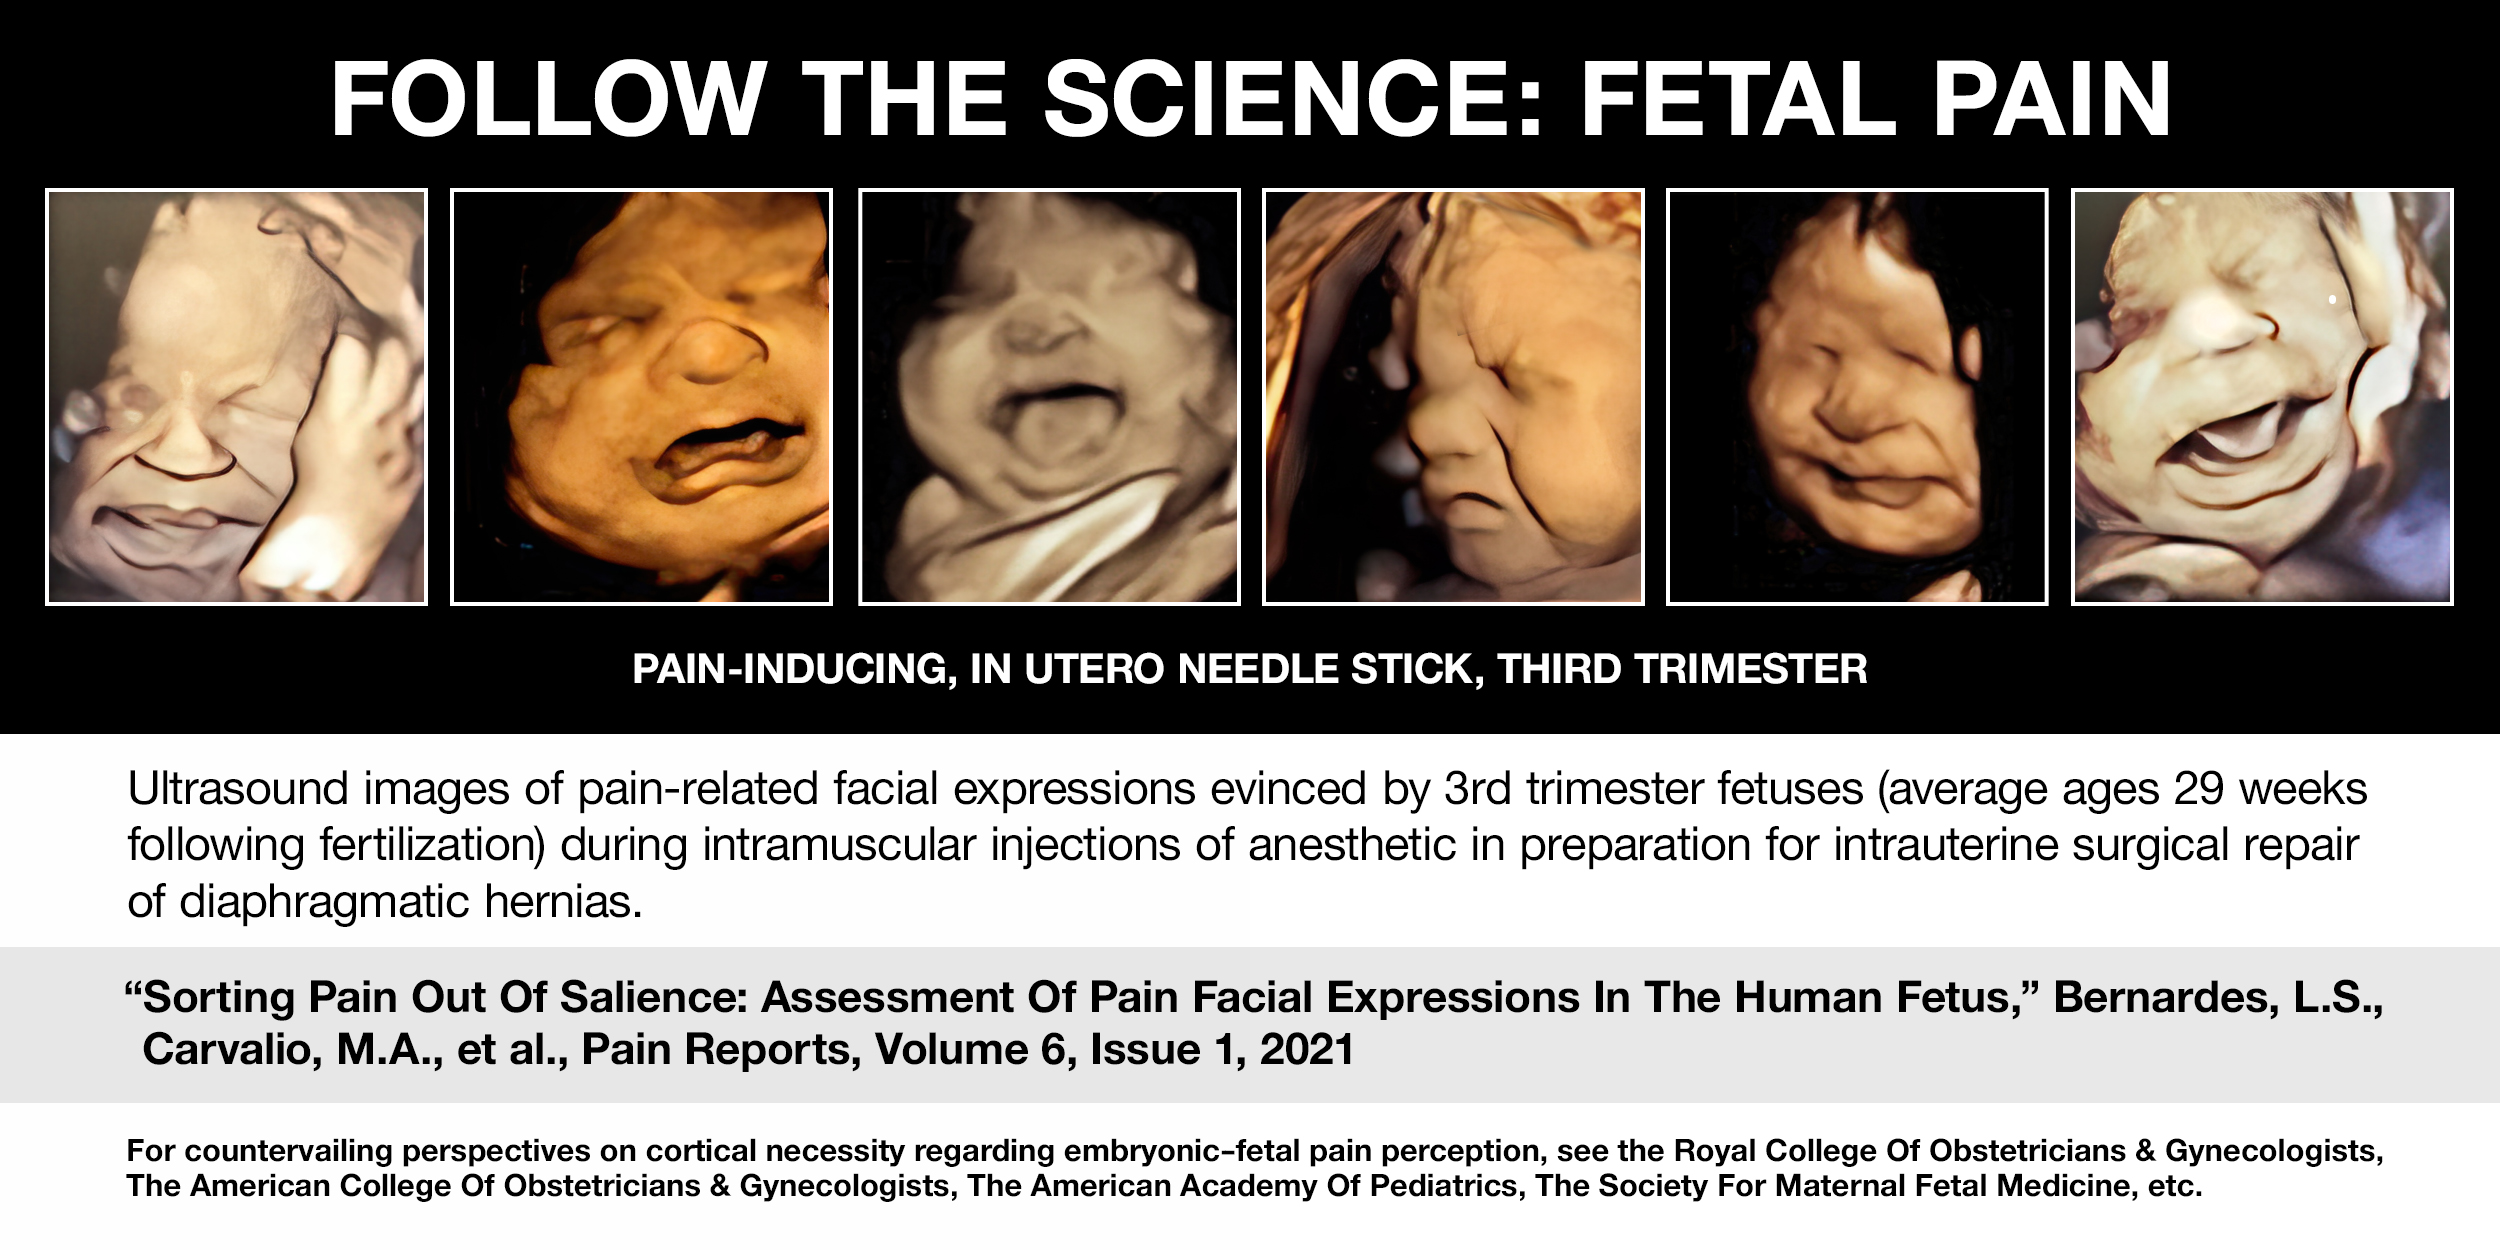 Follow the Science: Ultrasound images of pain-related facial expressions evinced by 3rd trimester fetuses